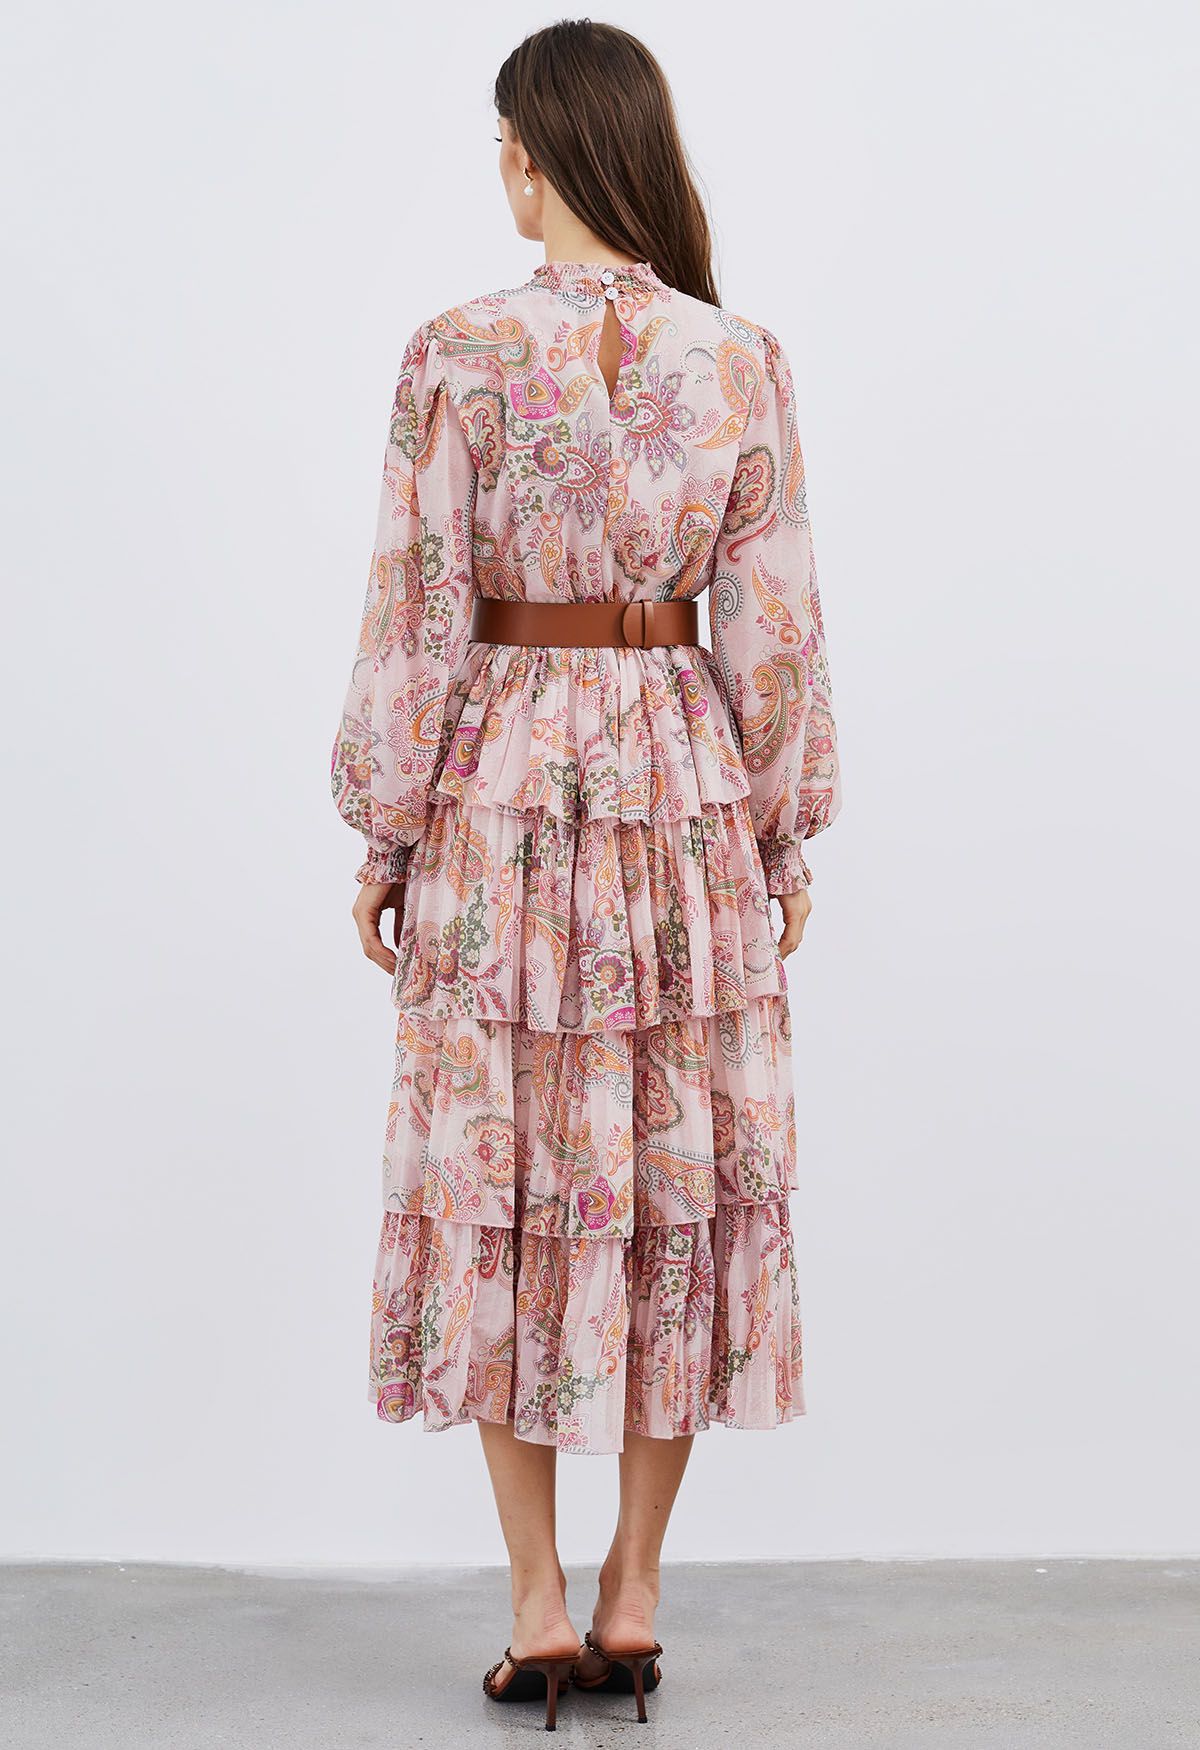 Paisley Printed Belted Tiered Chiffon Dress in Pink